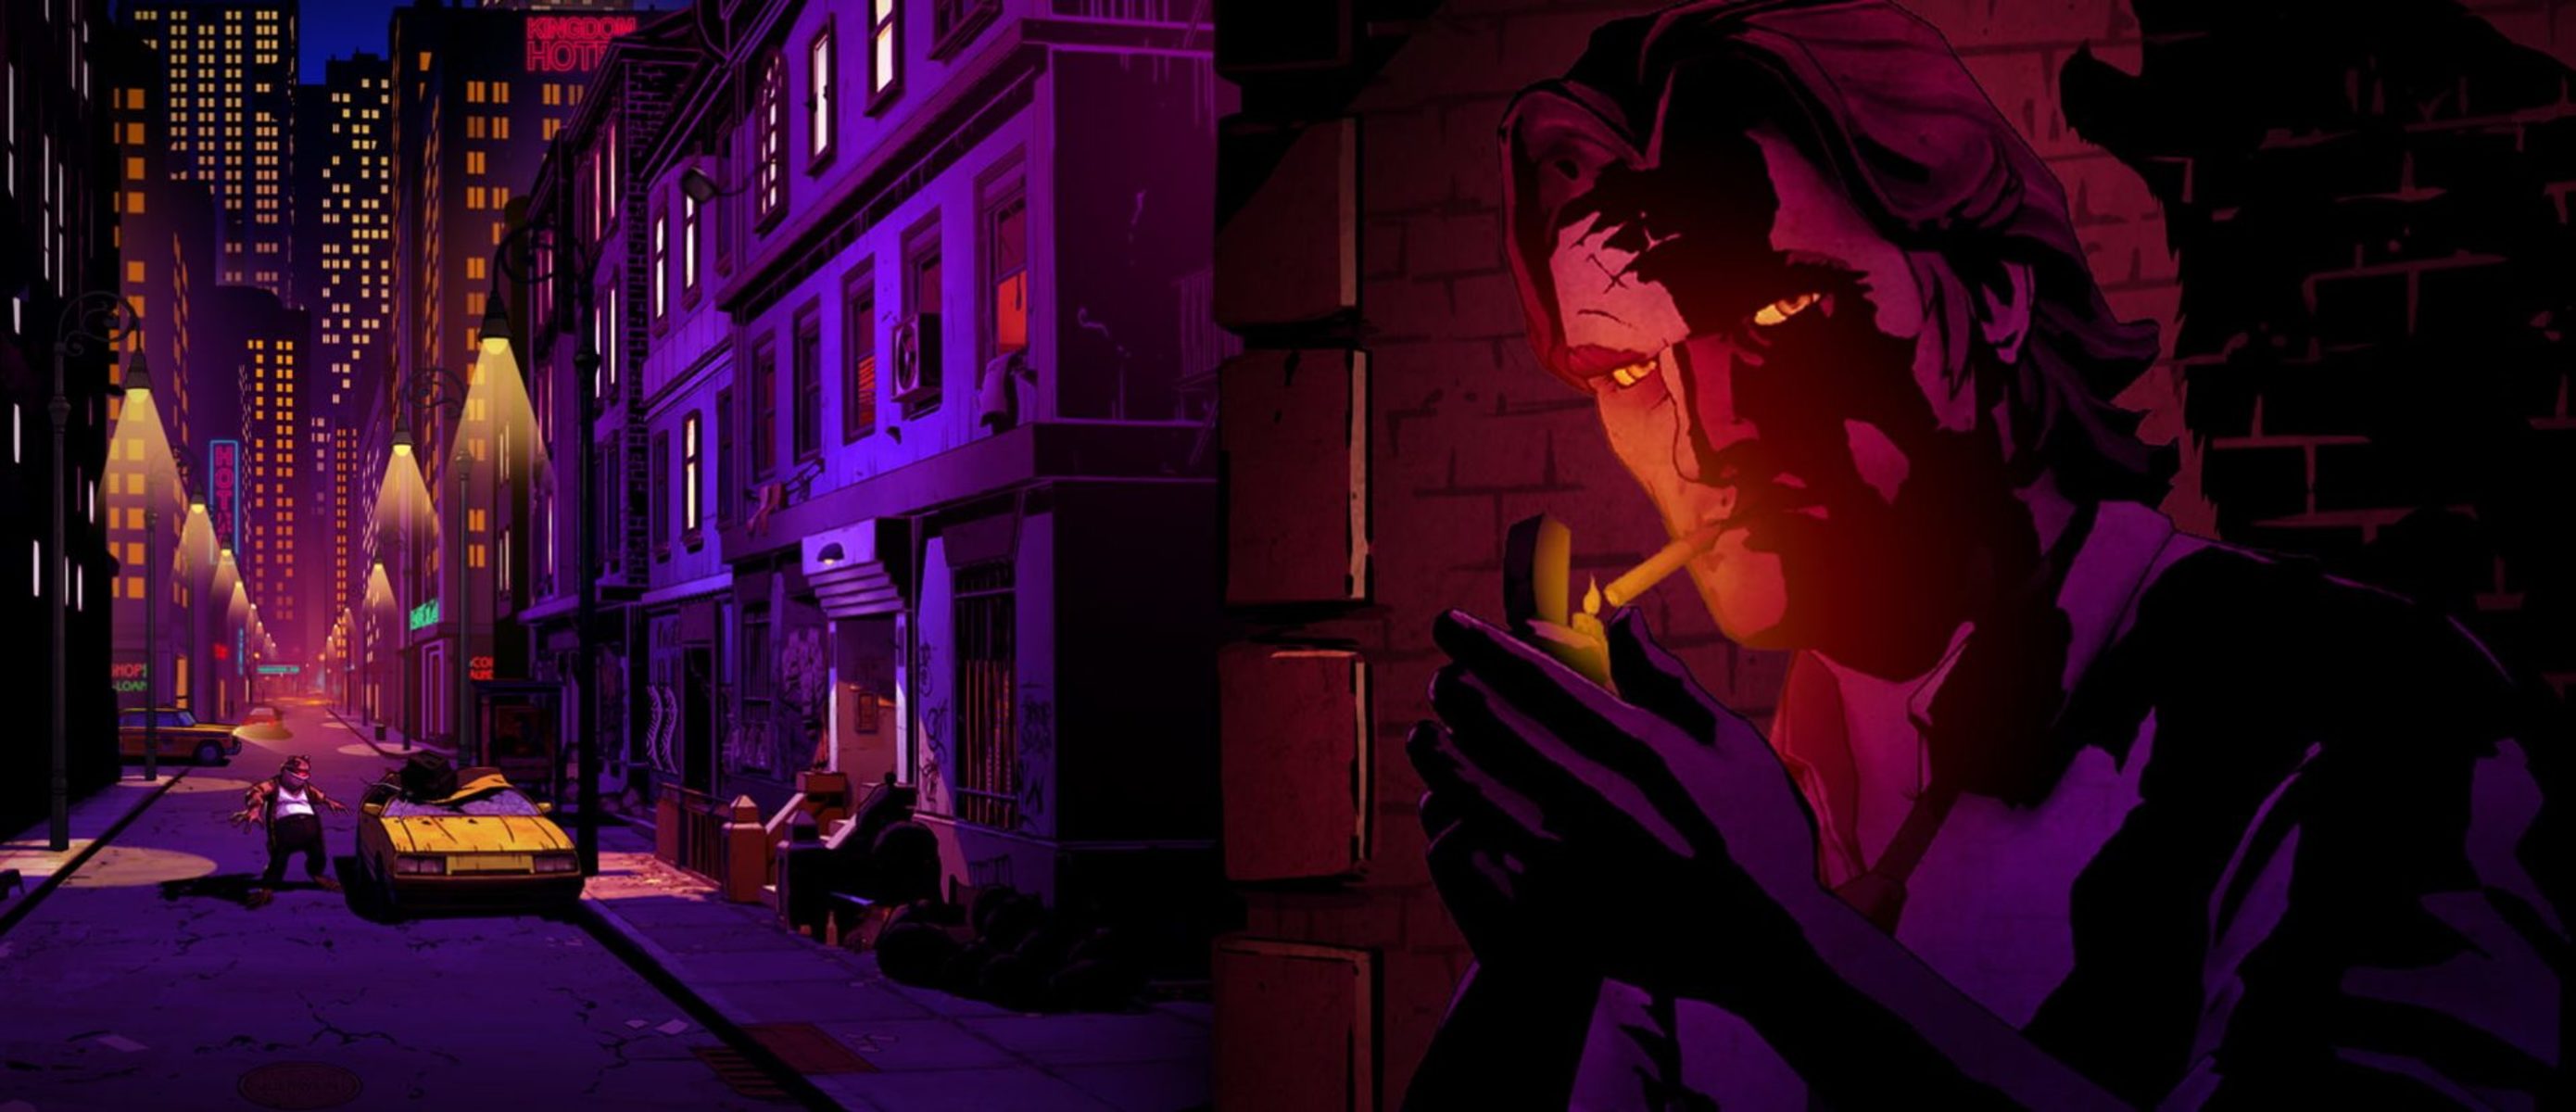 The. The Wolf among us игра. The Wolf among us волк. The Wolf among us 2. Колин the Wolf among us.